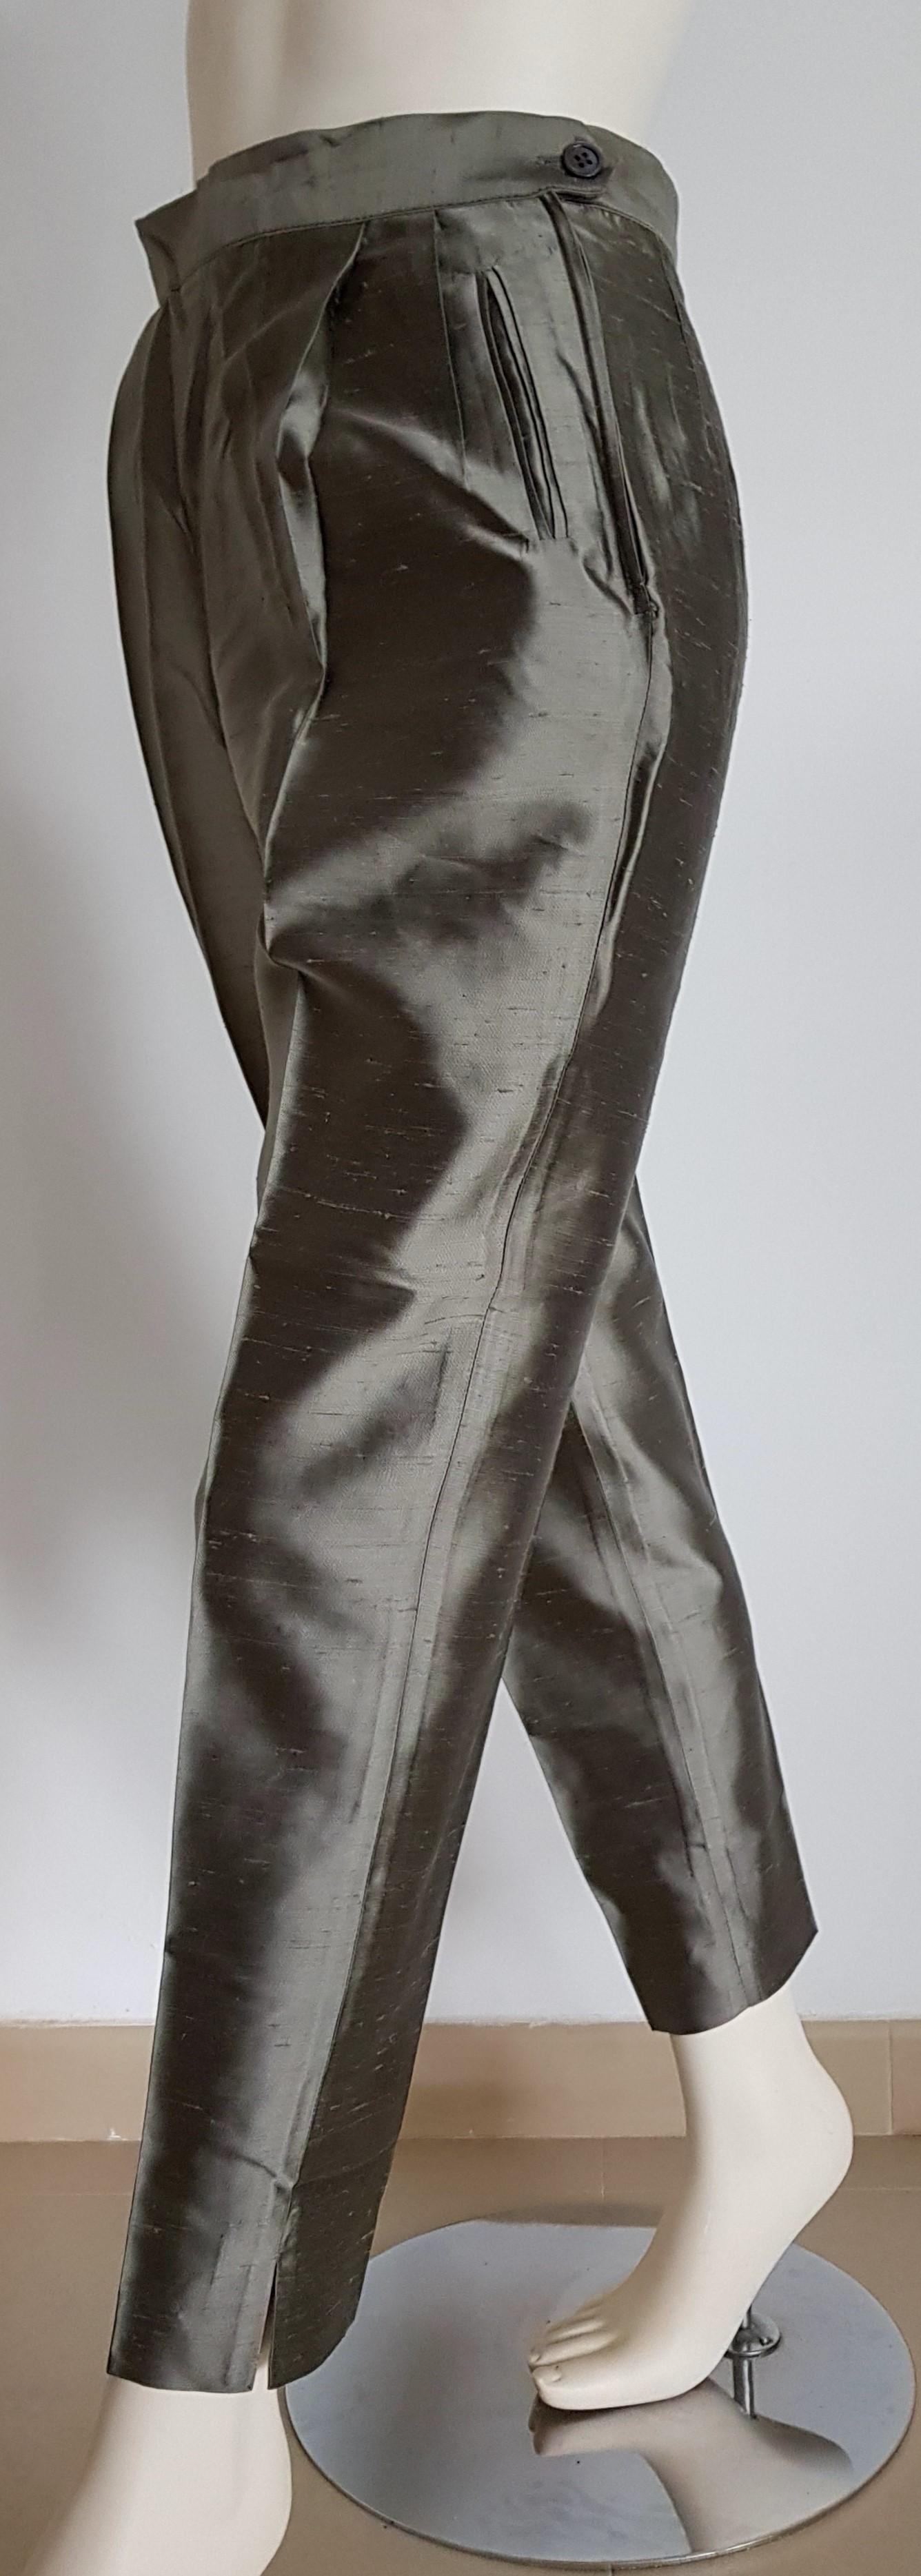 PRADA grey silk shantung pants - Unworn, New.

SIZE: equivalent to about Small / Medium, please review approx measurements as follows in cm. 
PANTS: lenght 101, inseam length 72, waist circumference 71, hip circumference 98, leg hem circumference